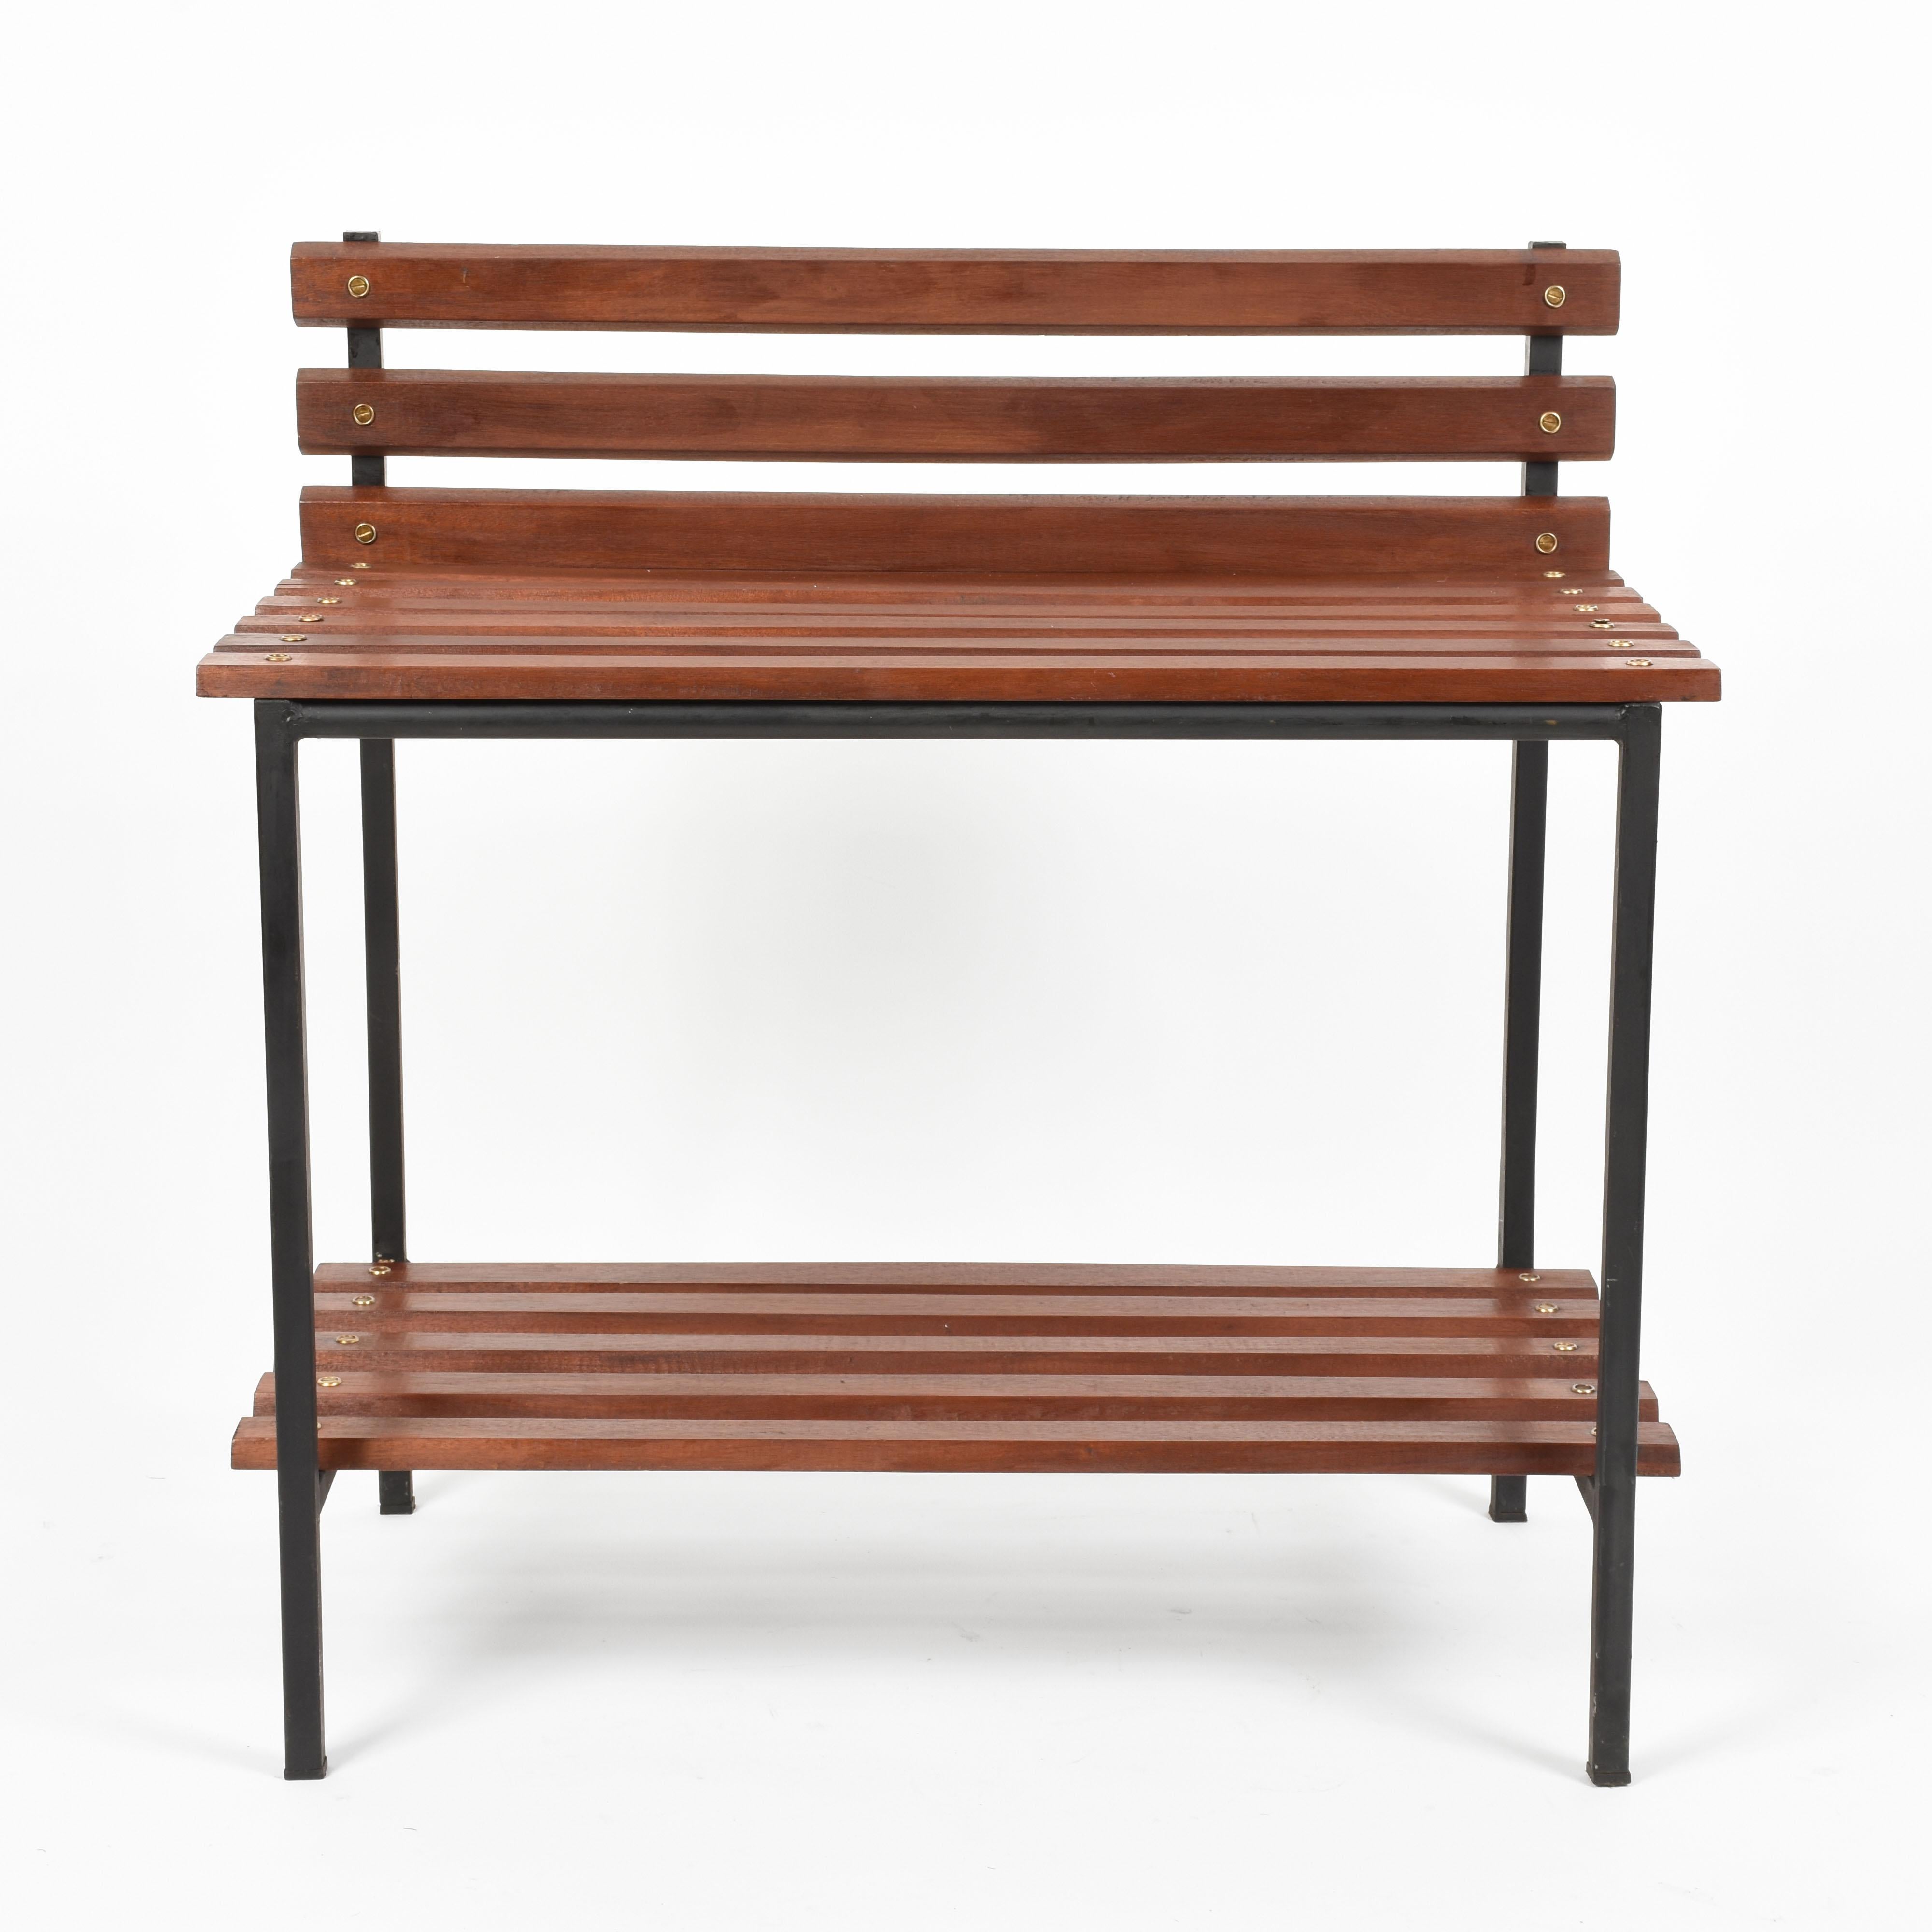 Mid-20th Century Midcentury Teak, Black Enameled Metal and Brass Italian Bench, 1960s For Sale